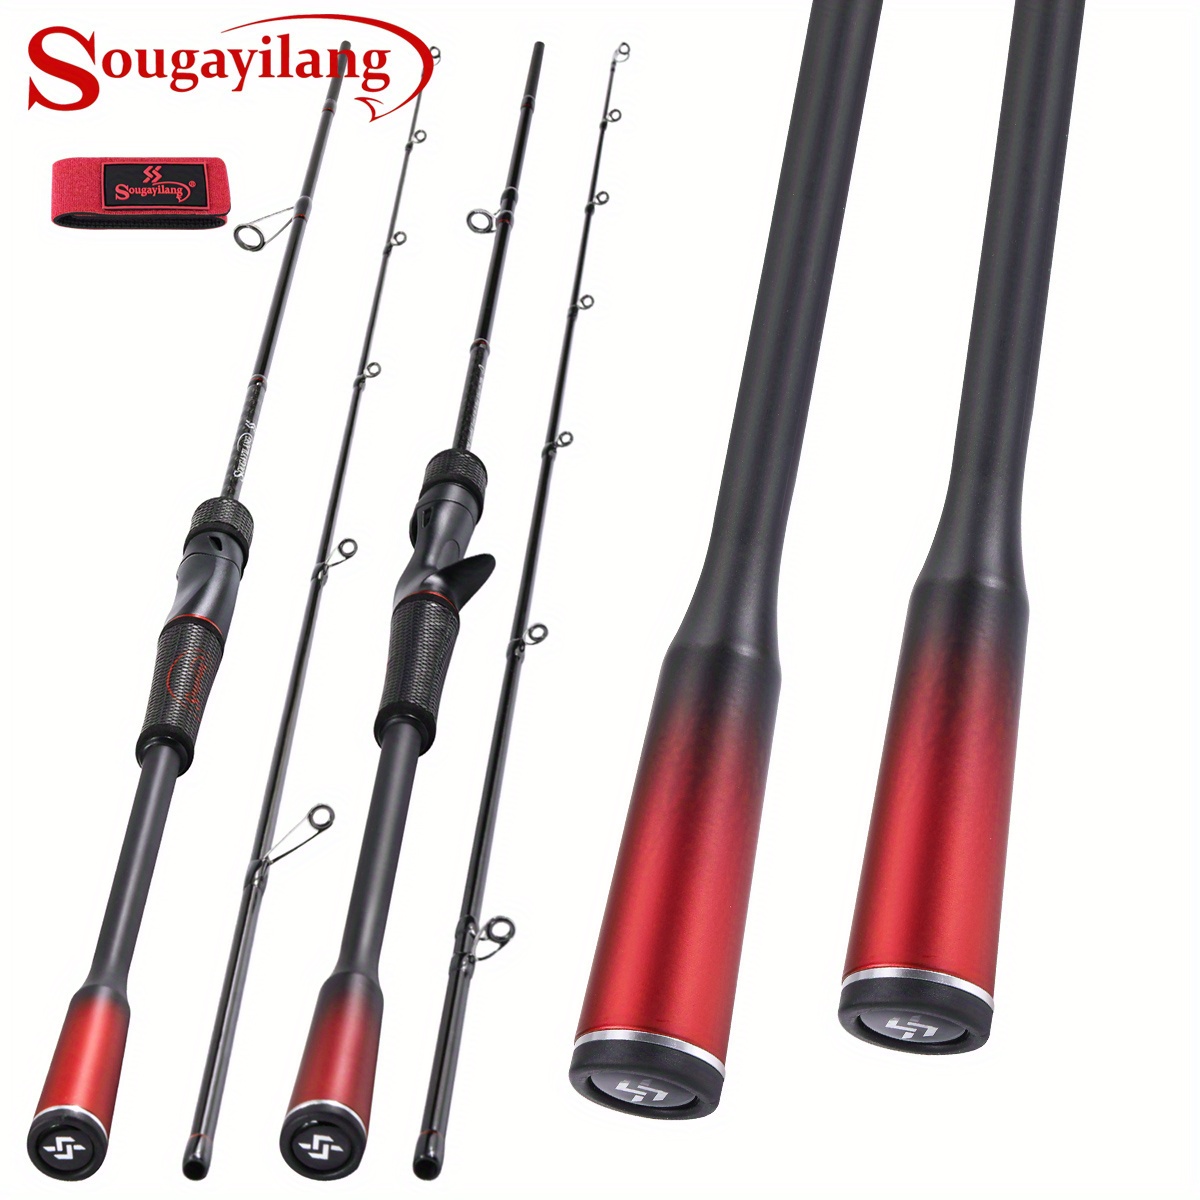 Sougayilang Tournament Quality 1pc Bass Rod 24-Ton Carbon Fiber 2-section  Super Polymer Handle Fishing Rod For Bass Fishing